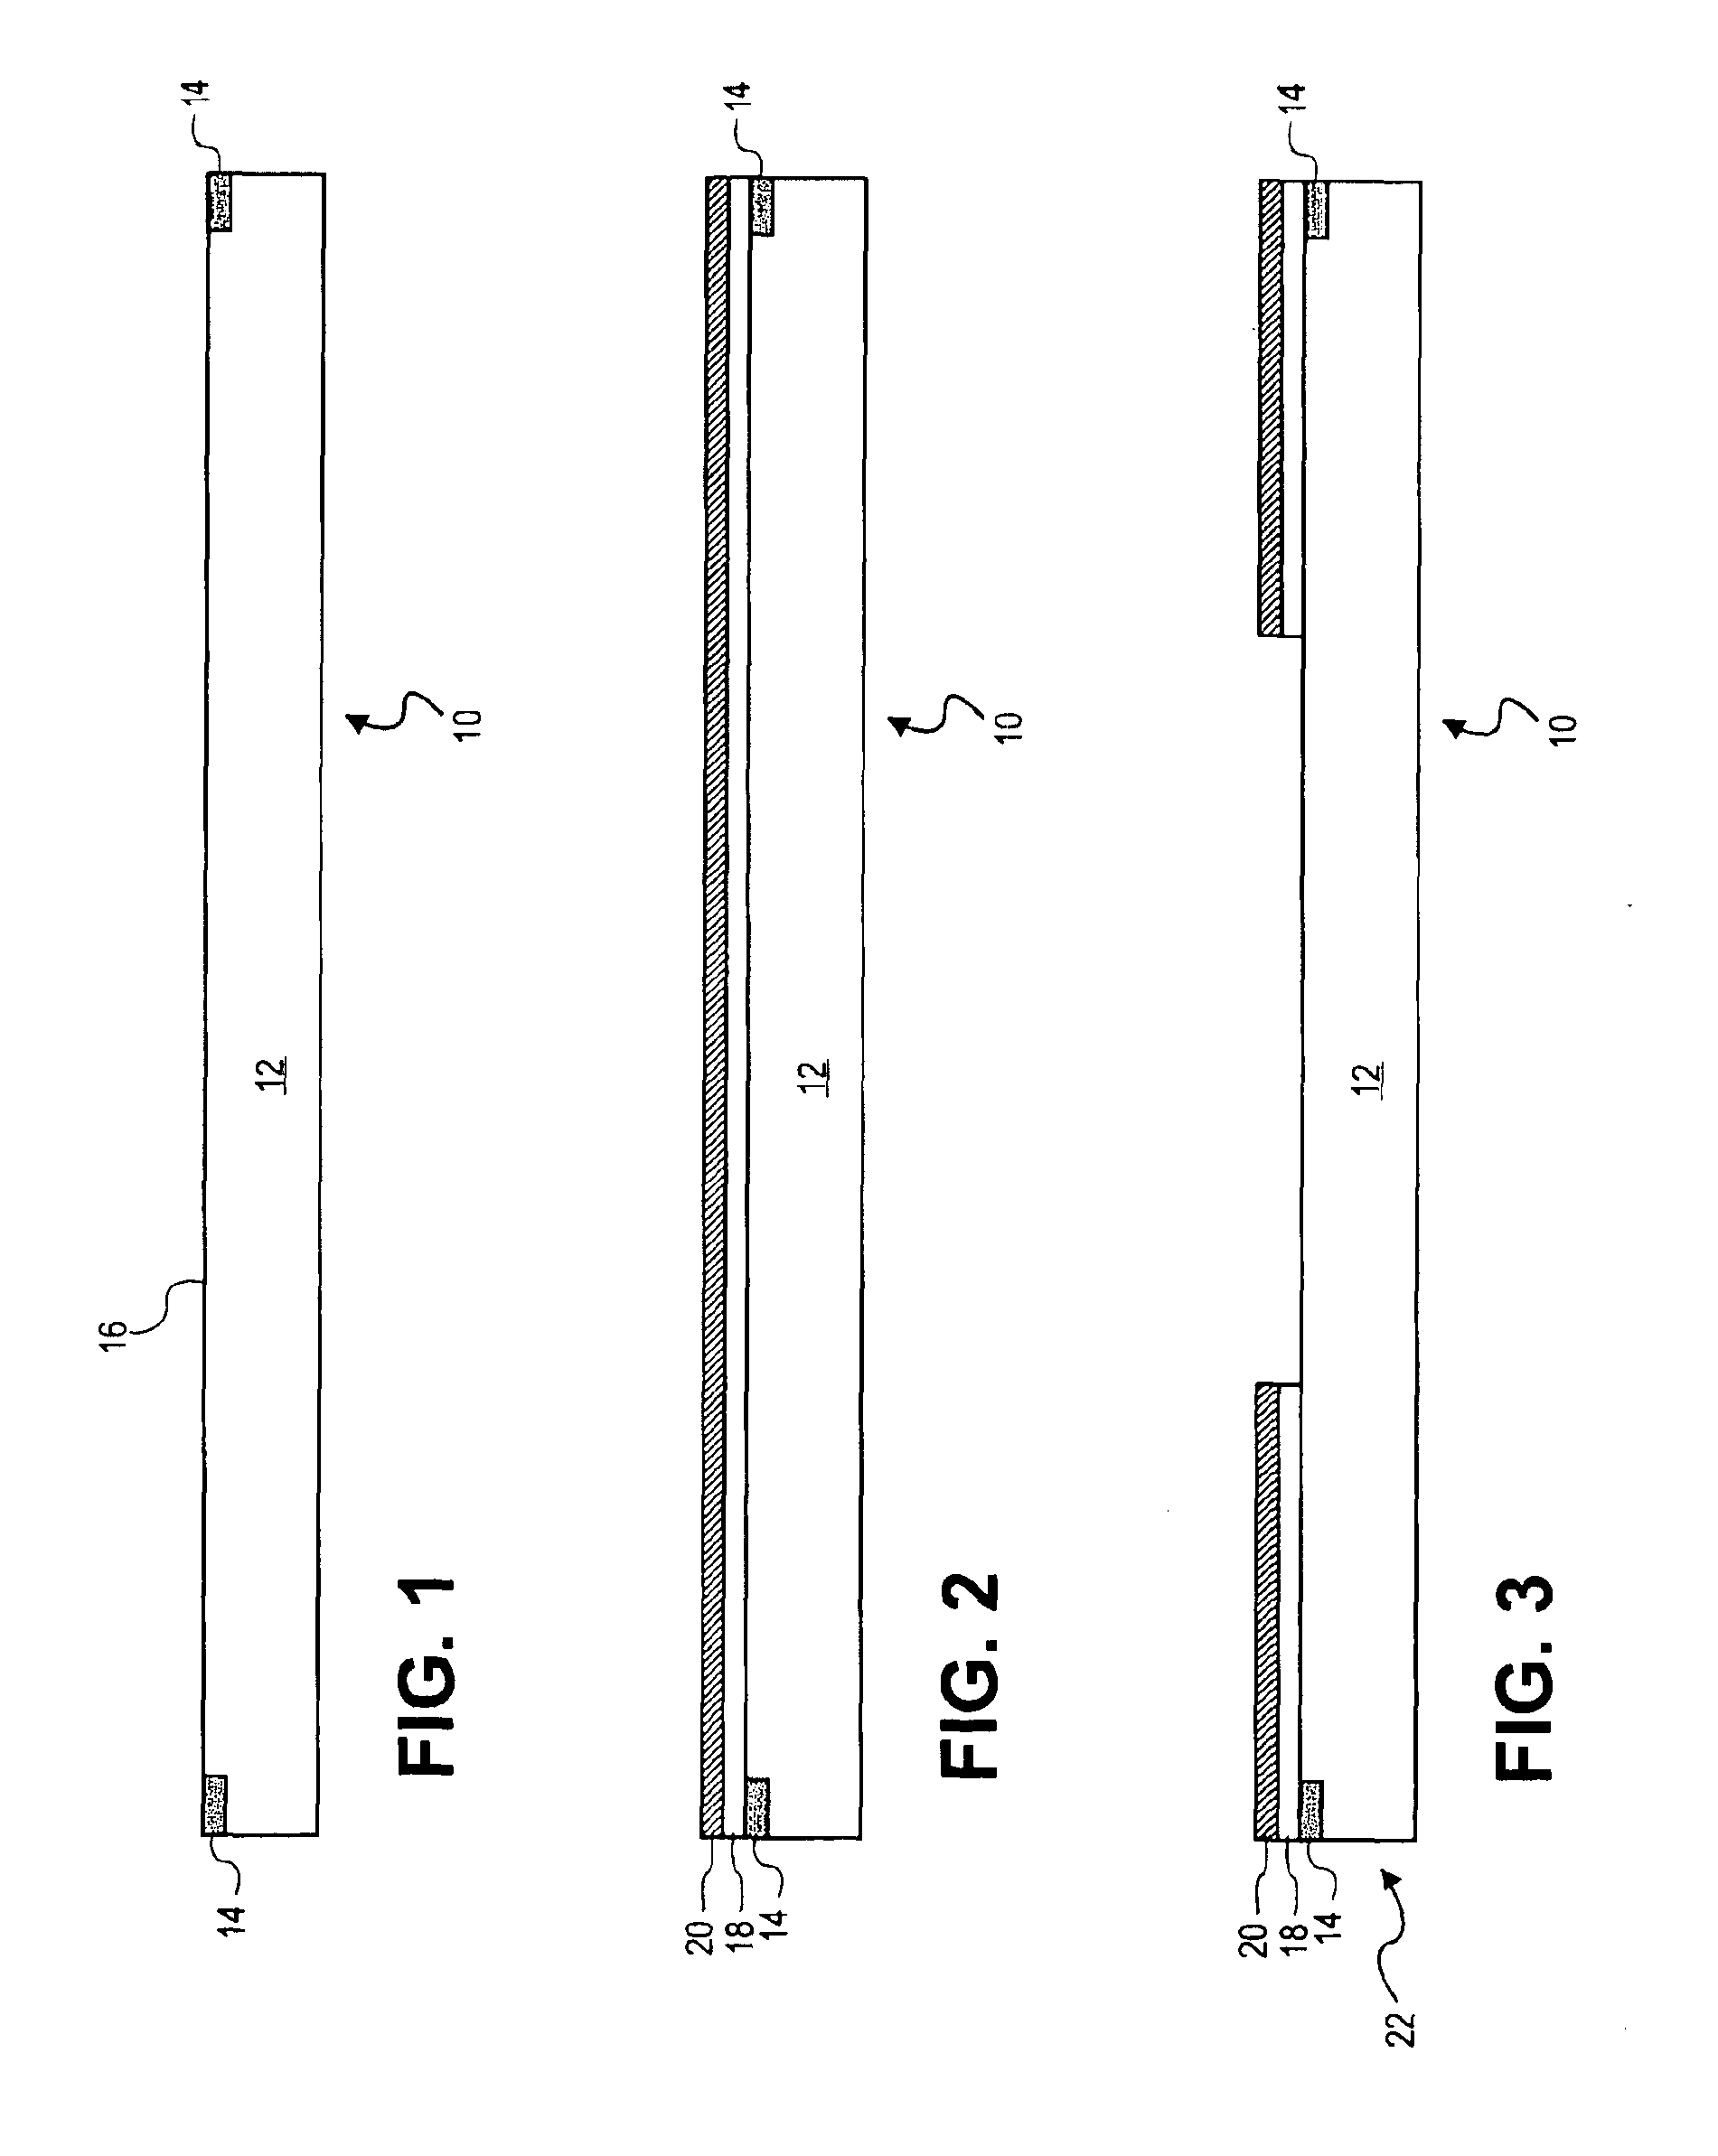 Stacked ferroelectric memory device and method of making same